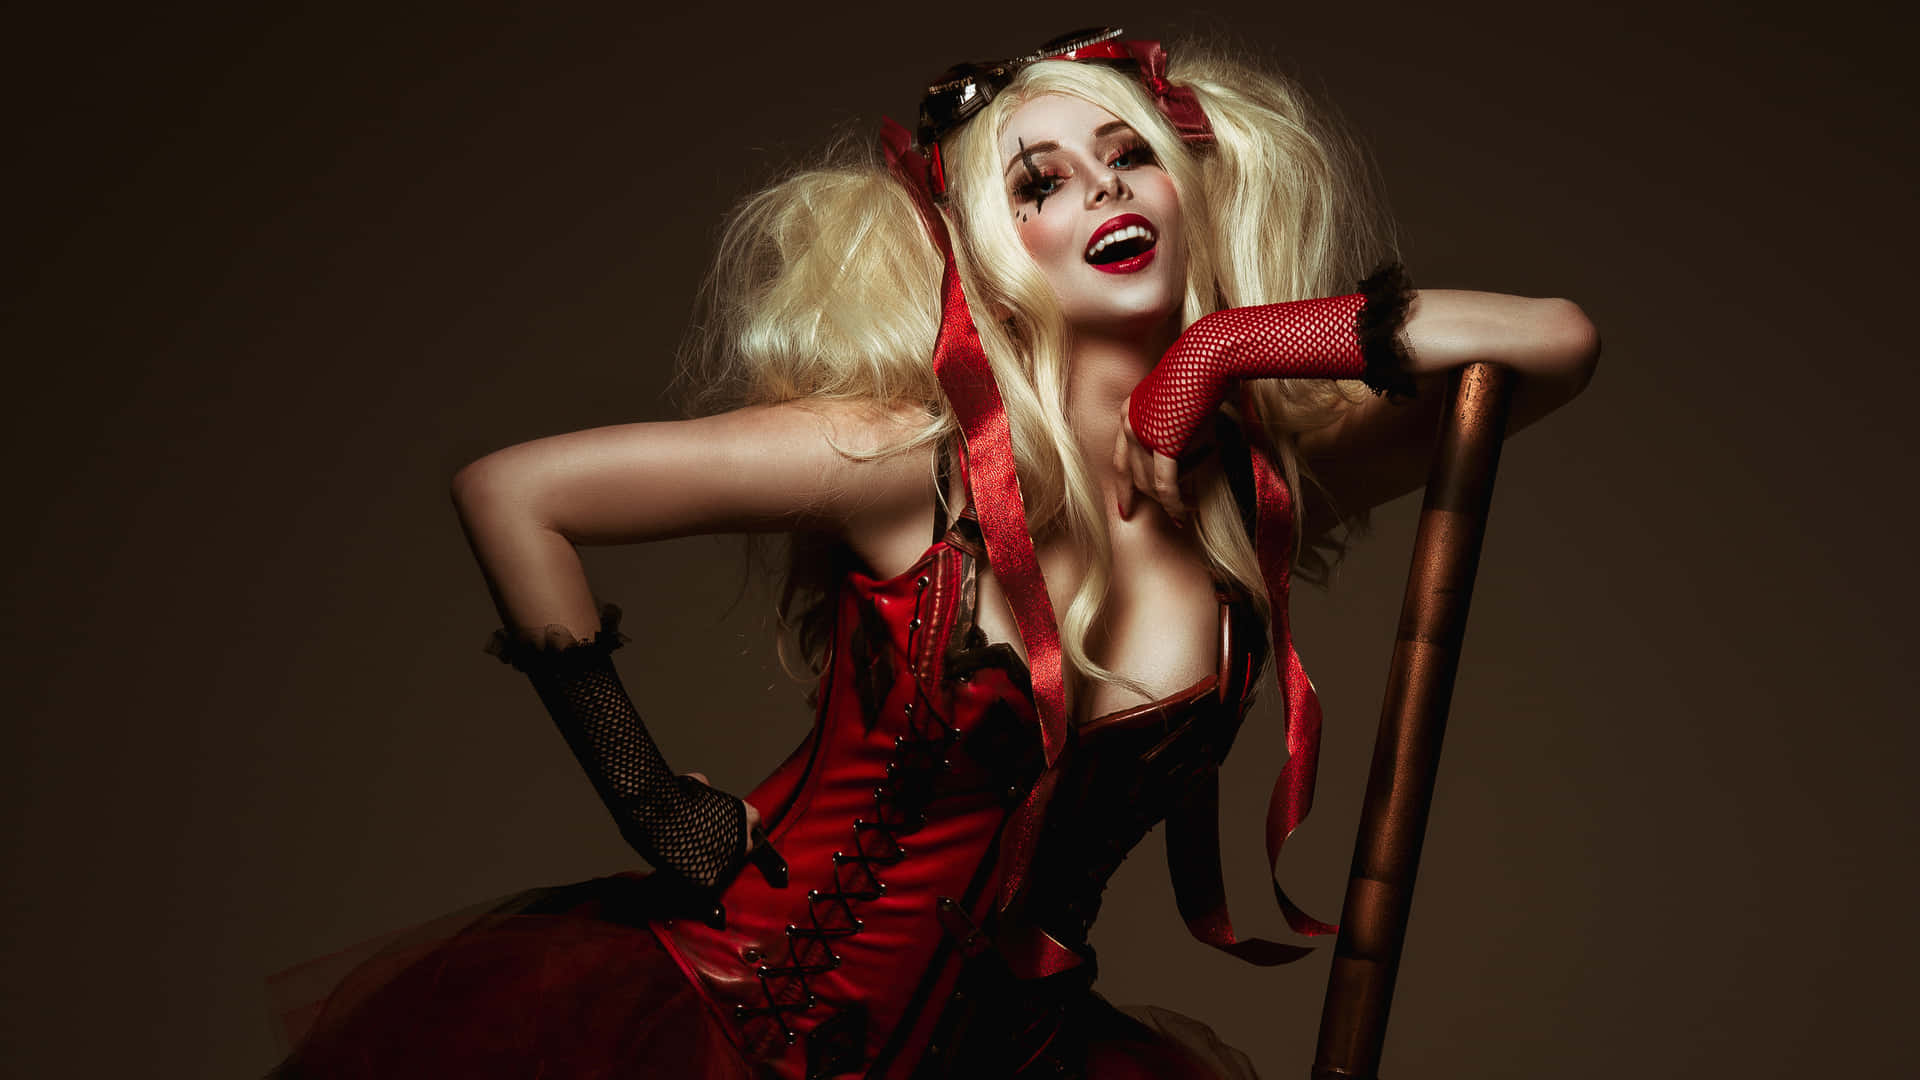 Stunning Harley Quinn Cosplay poses fiercely in a realistic costume. Wallpaper